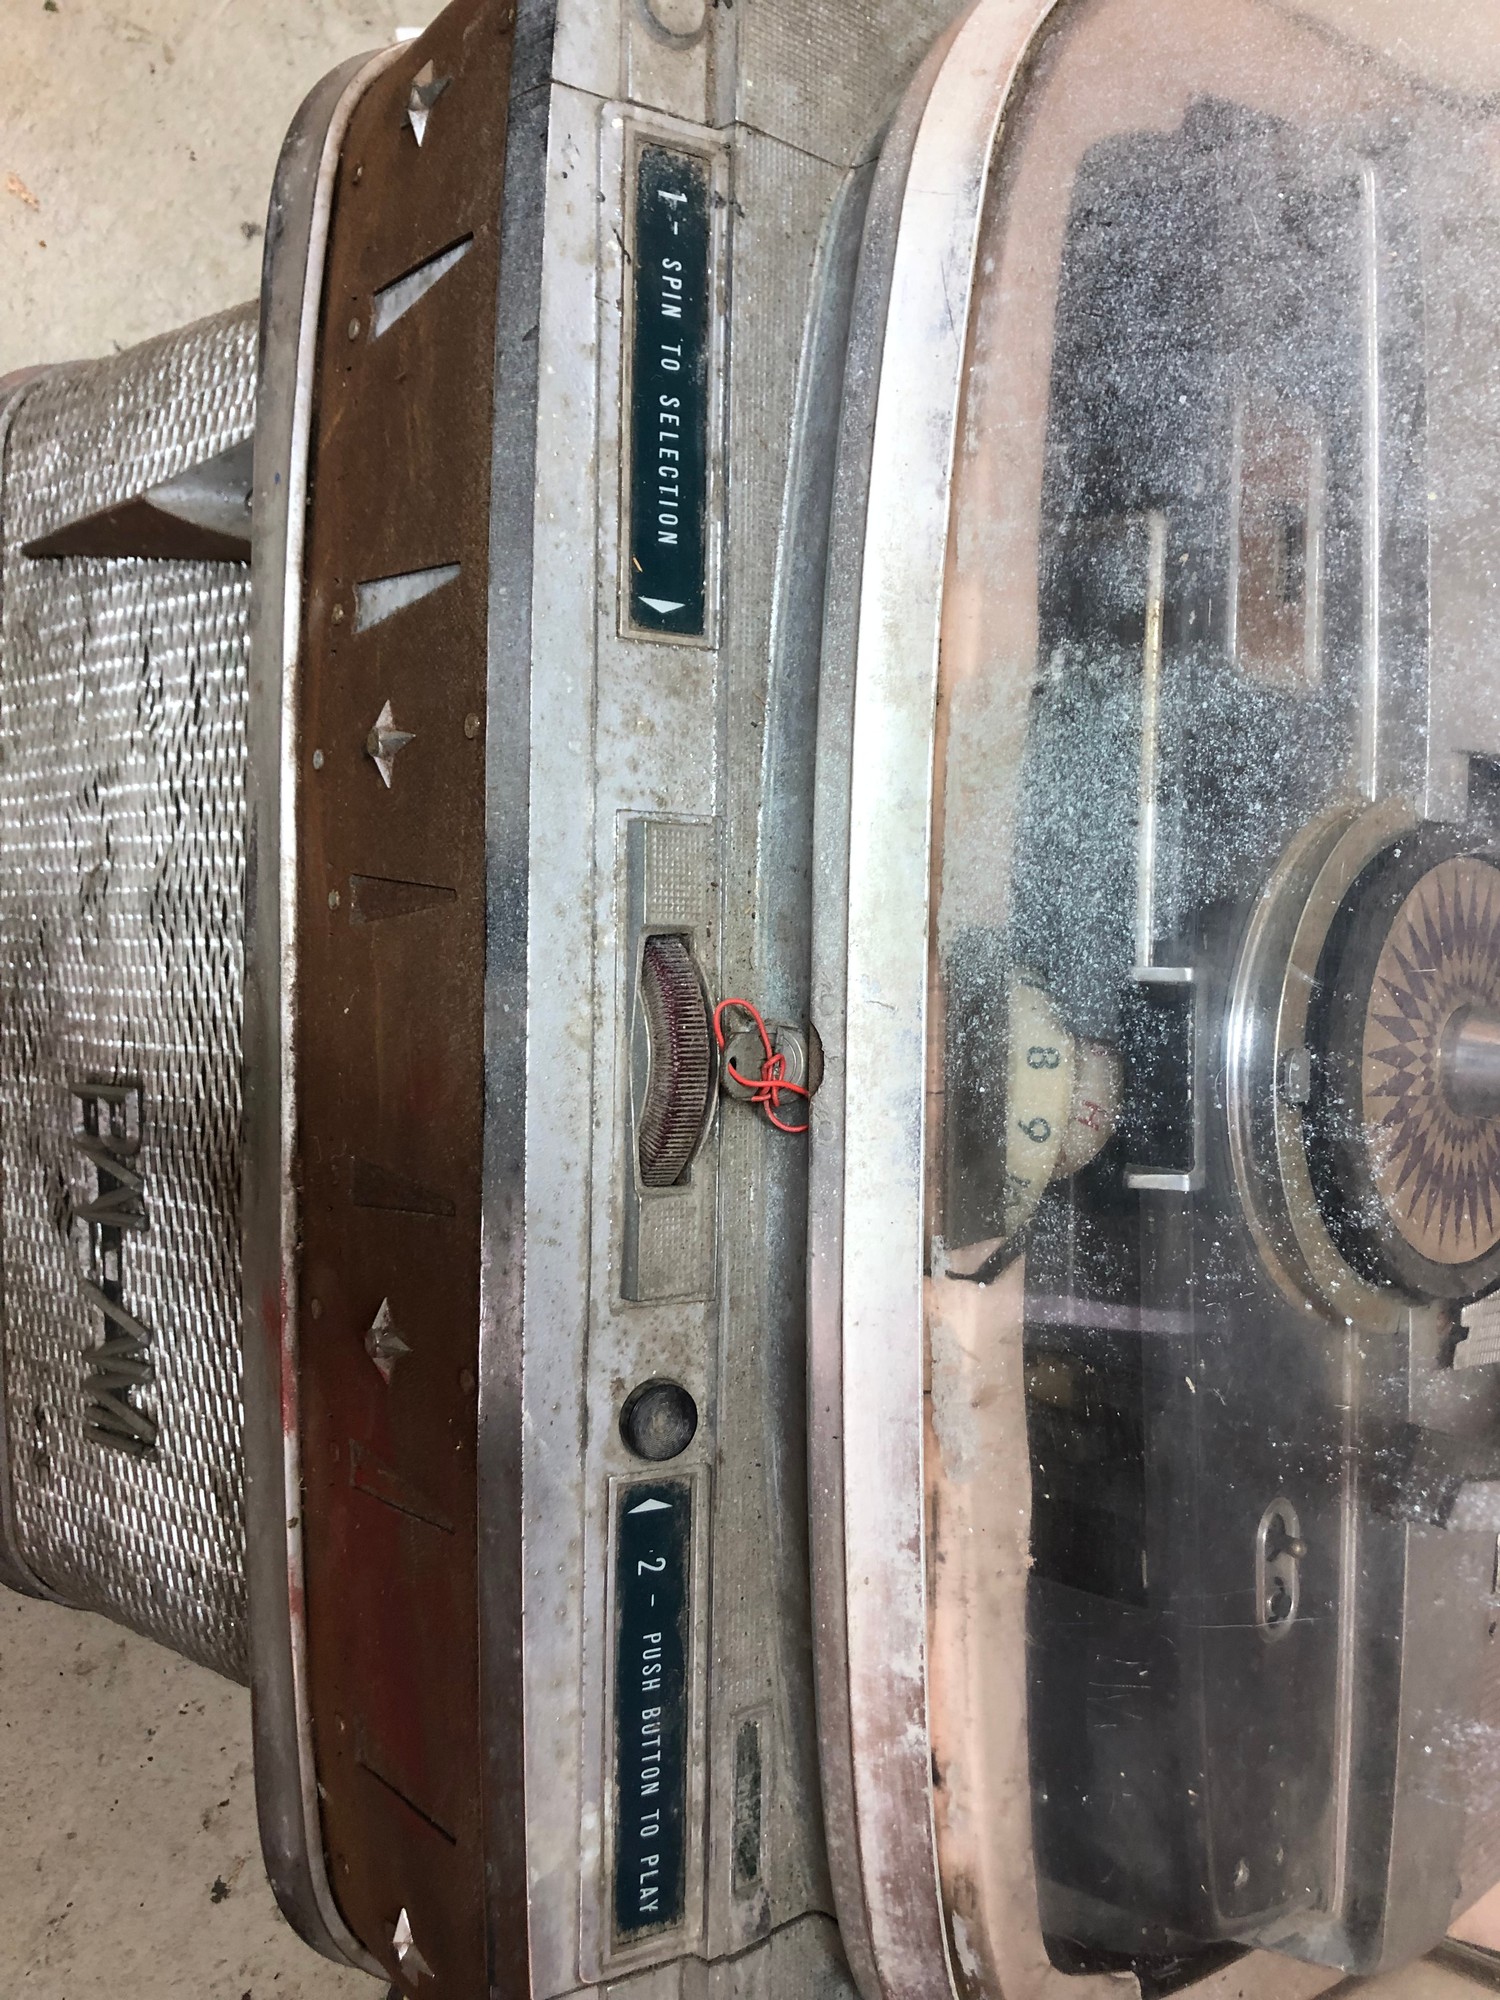 Rare 1950s Bal-AMi 200 Jukebox in "Barn Find" condition and in need of complete restoration, - Image 15 of 27